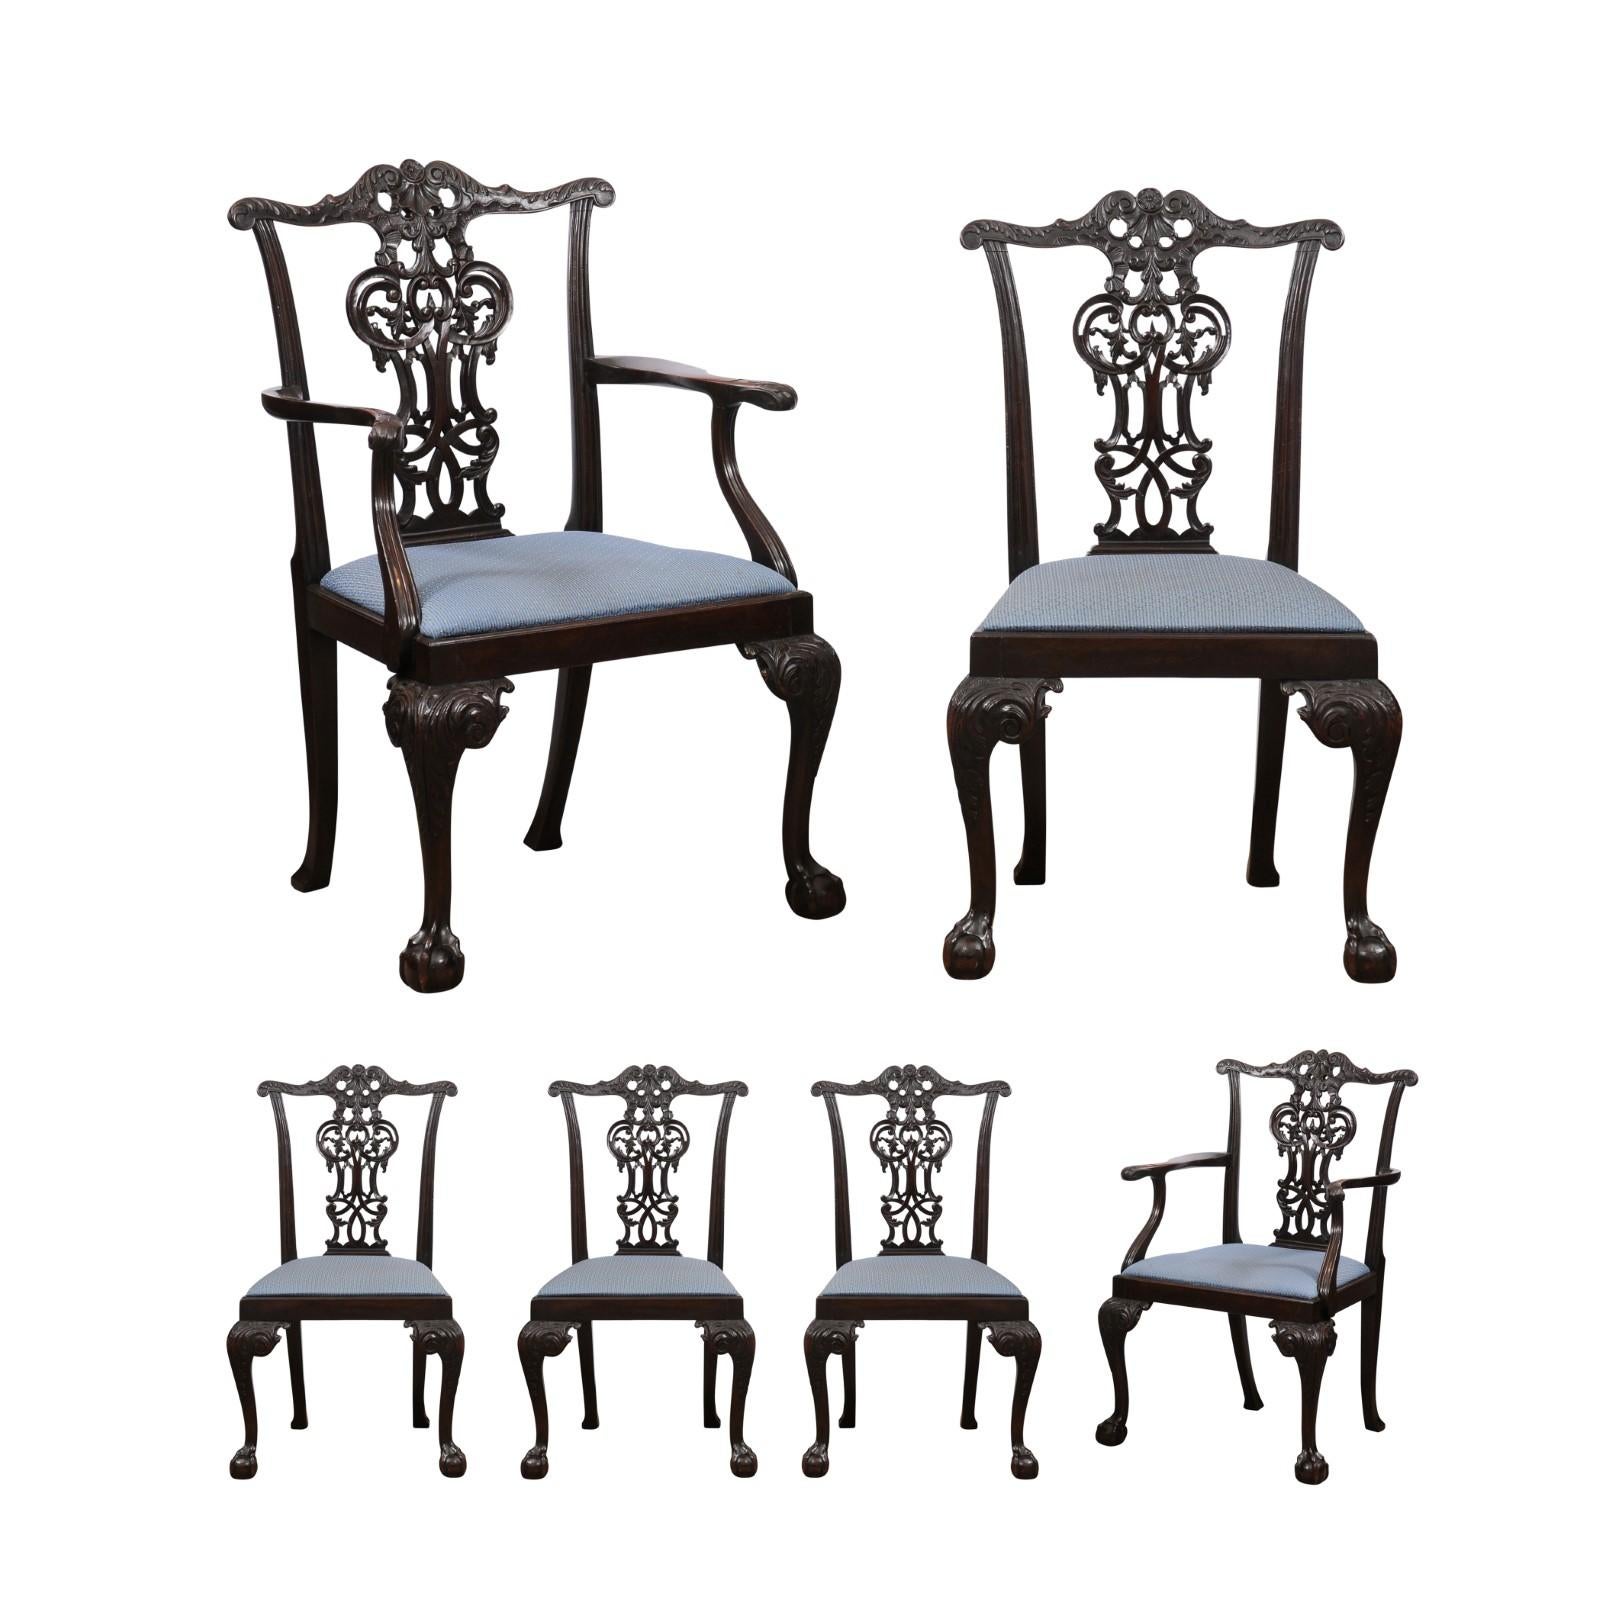 Set of 6 English Chippendale Style Mahogany Dining Chairs with Ball & Claw Feet, Ca. 1860